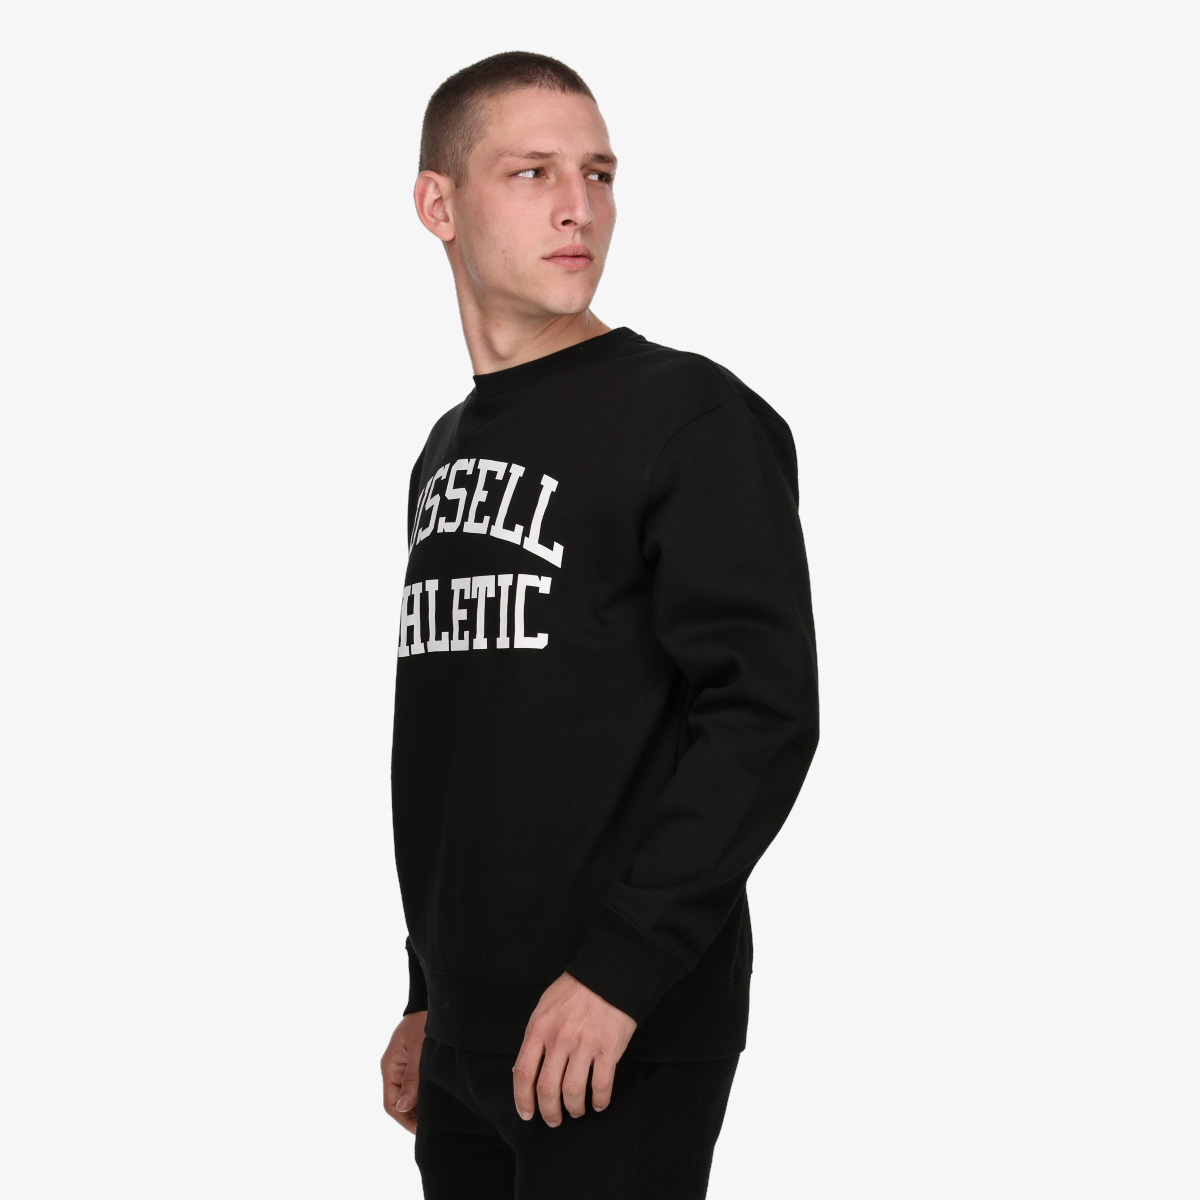 Russell Athletic Dukserica Iconic2 